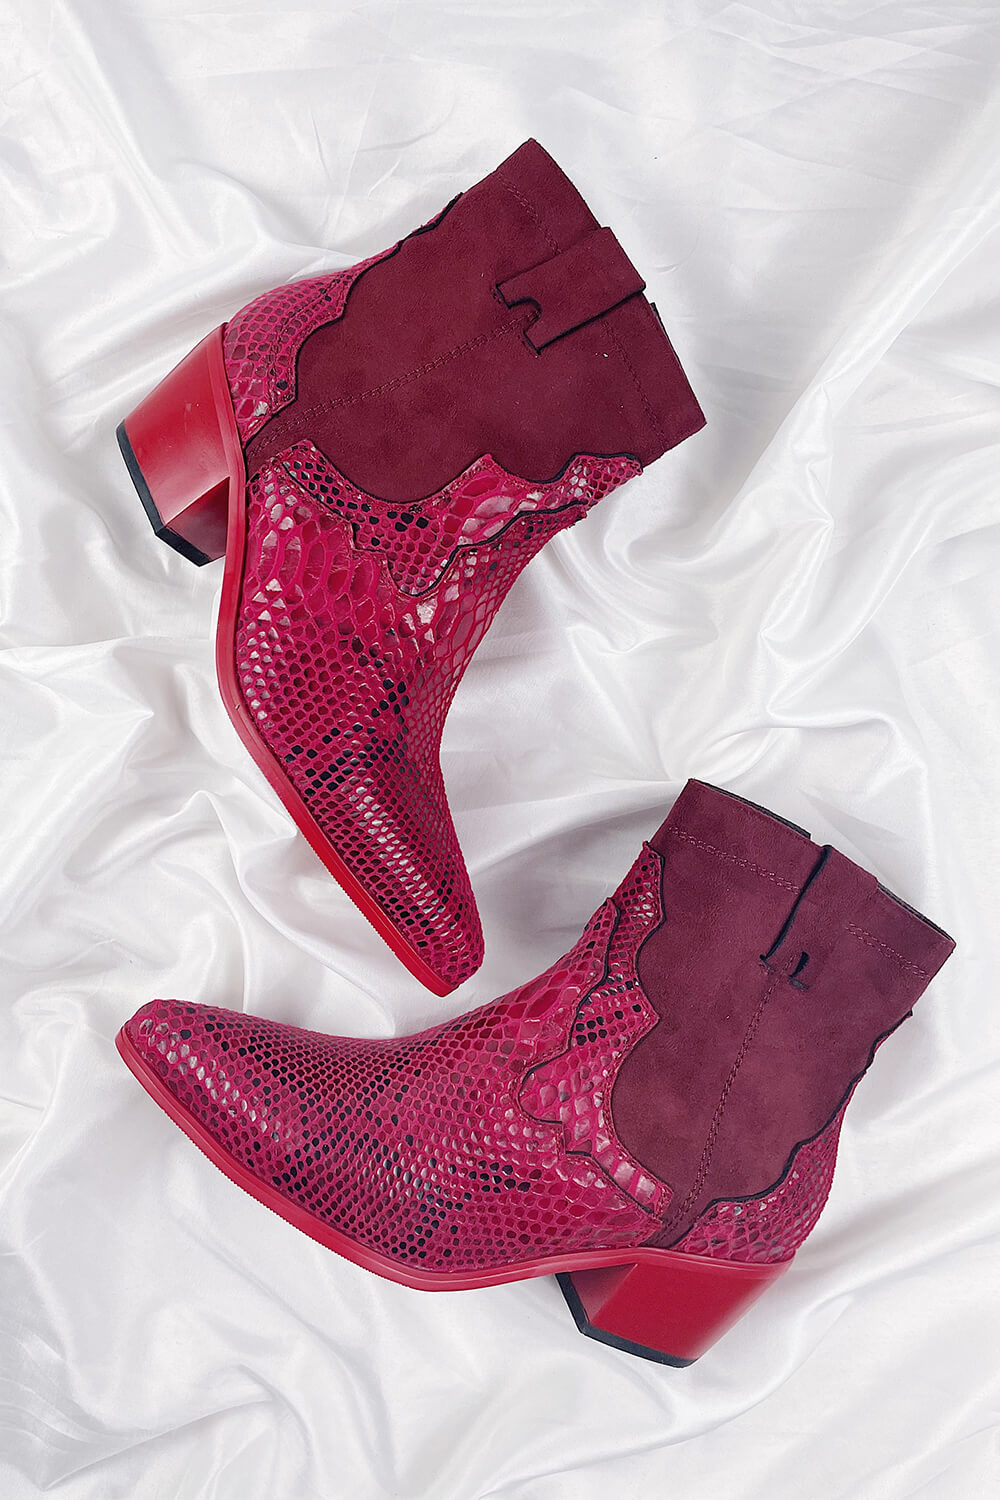 Red Snake Suede Cowboy Boots